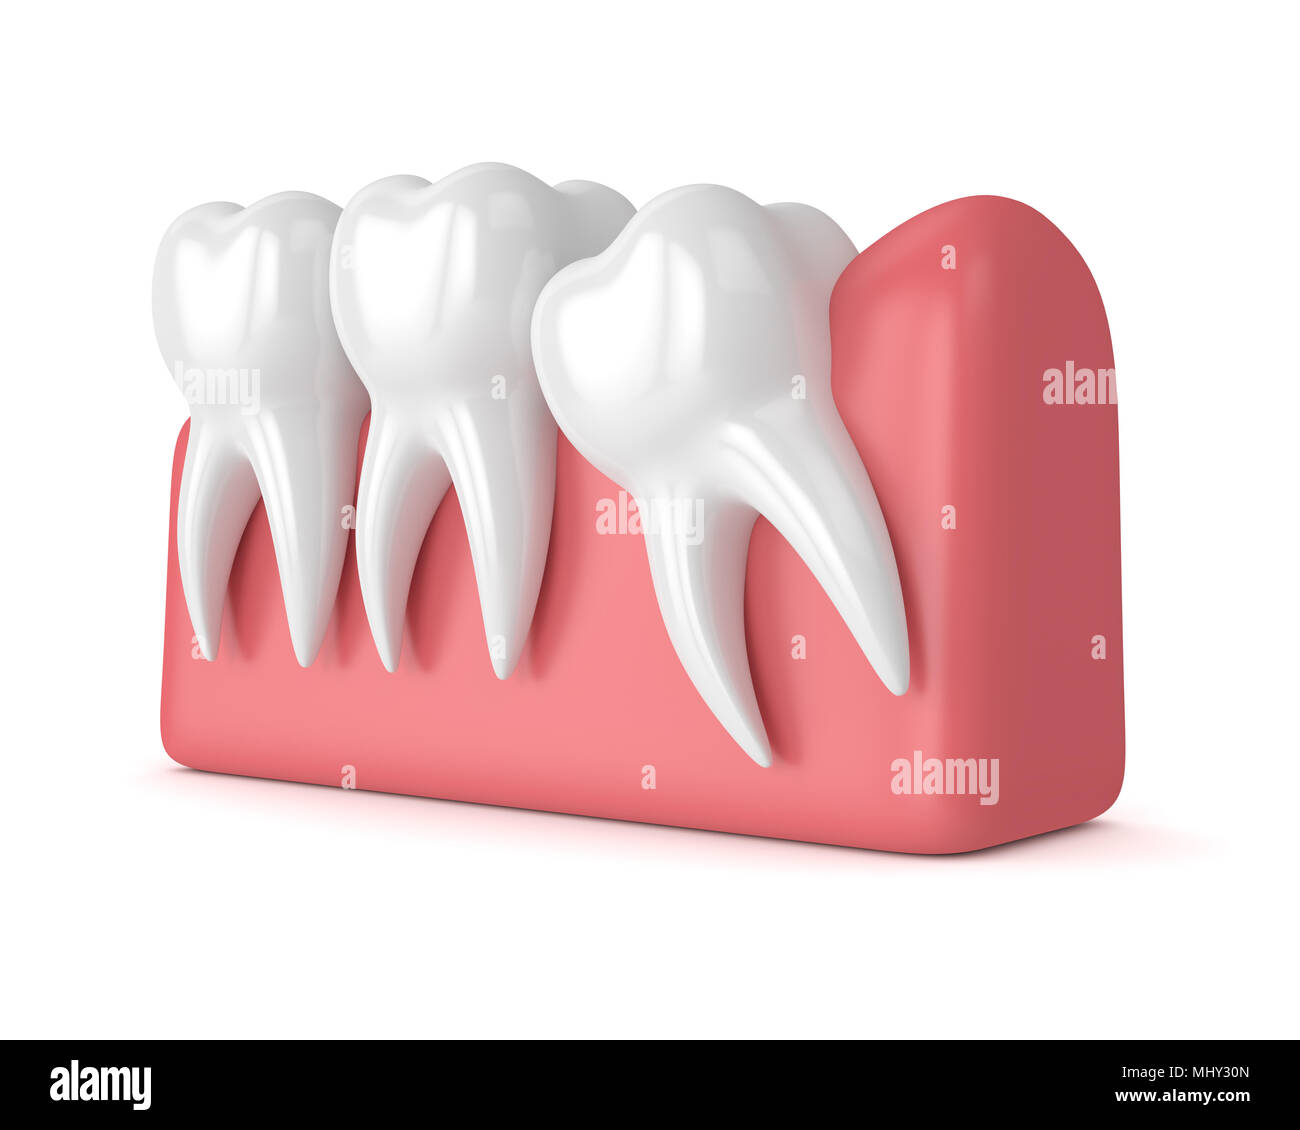 3d render of teeth with wisdom mesial impaction over white background. Concept of different types of wisdom teeth impactions. Stock Photo